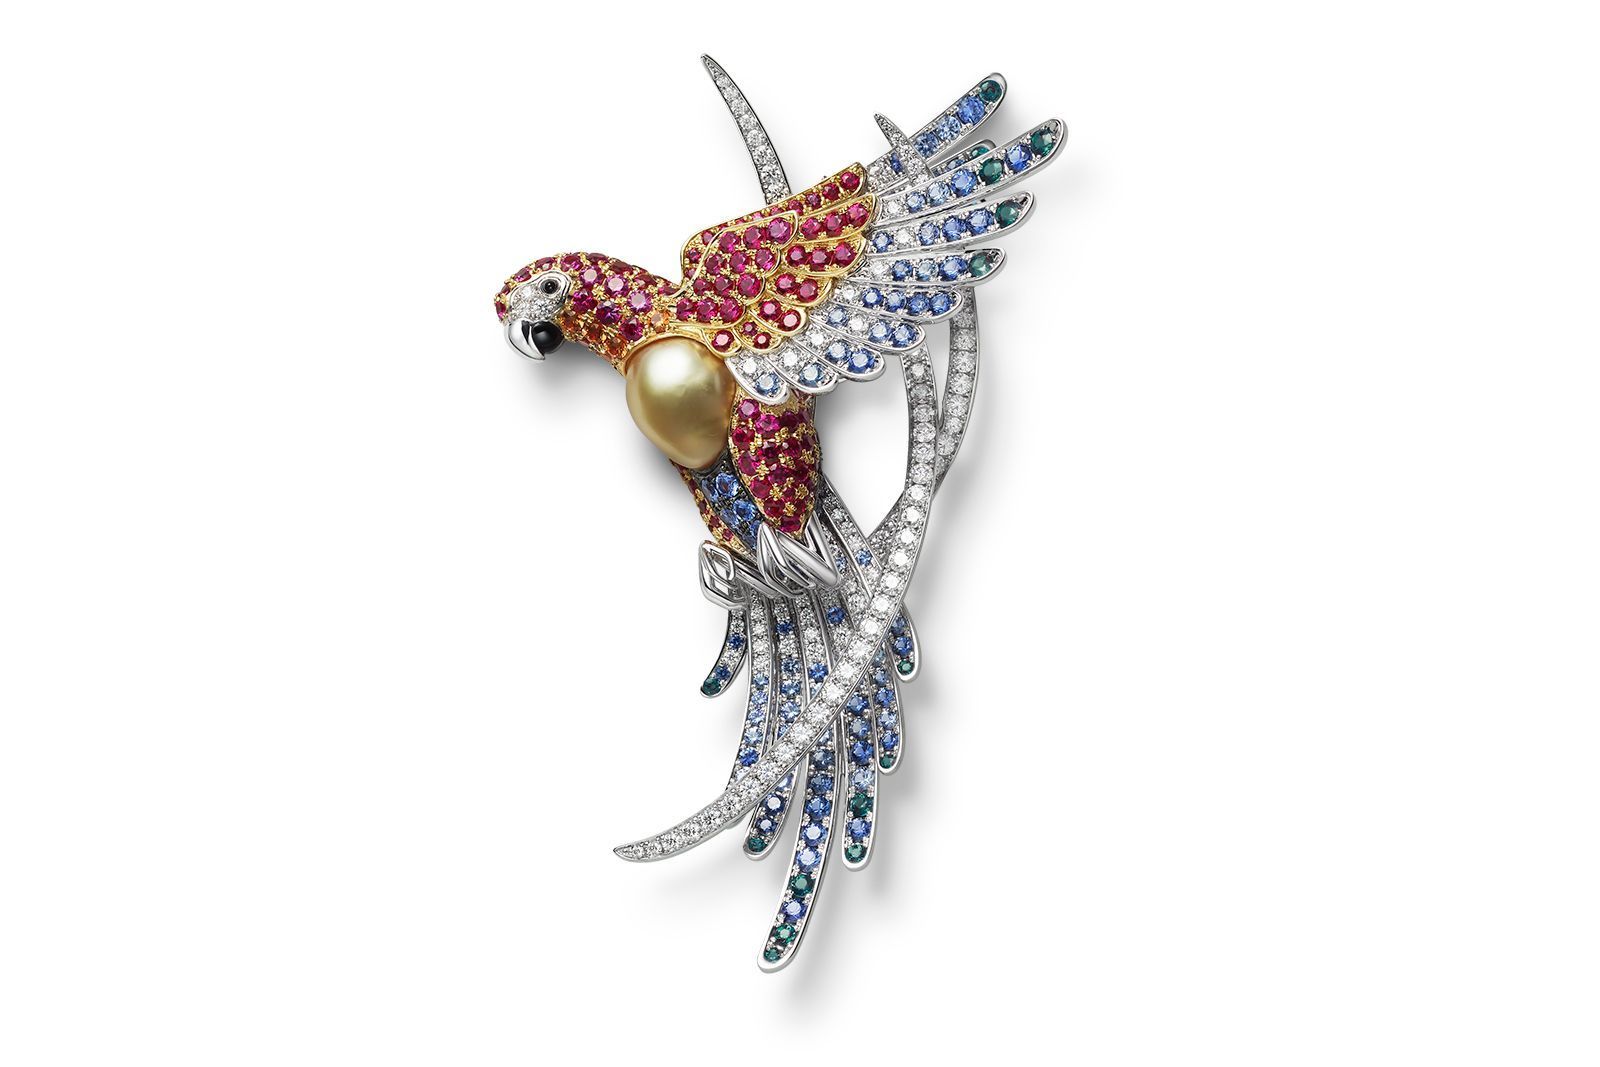 Mikimoto America Macaw brooch in 18K white and yellow gold with golden South Sea cultured pearl, ruby, sapphire, alexandrite, garnet, onyx and diamond from the Wild and Wonderful High Jewellery collection